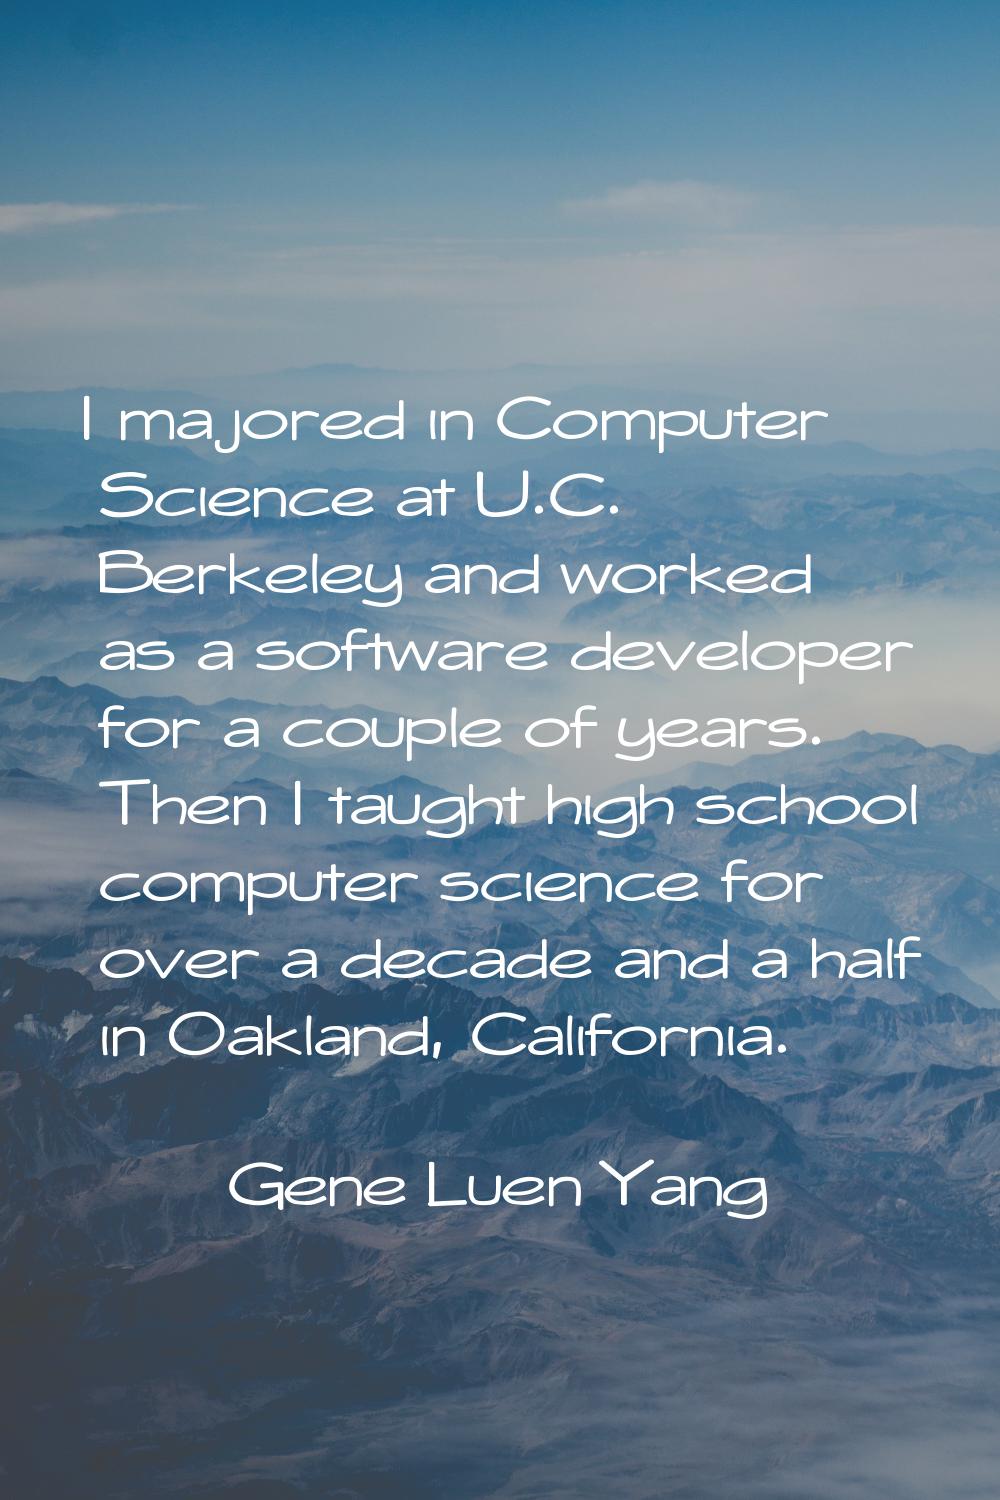 I majored in Computer Science at U.C. Berkeley and worked as a software developer for a couple of y